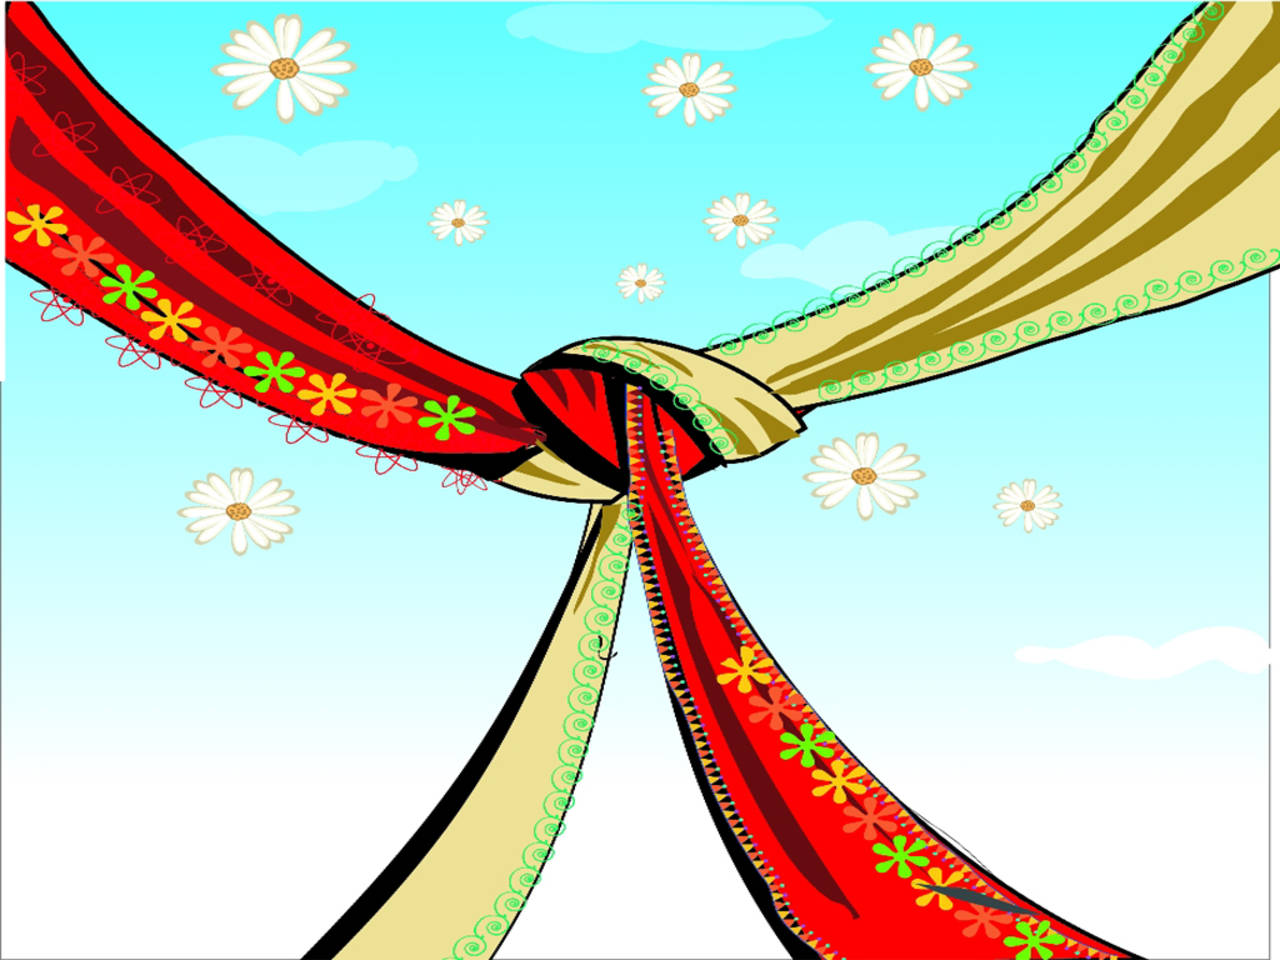 Inter-caste couples tie the knot at festival of love | Trichy News - Times  of India